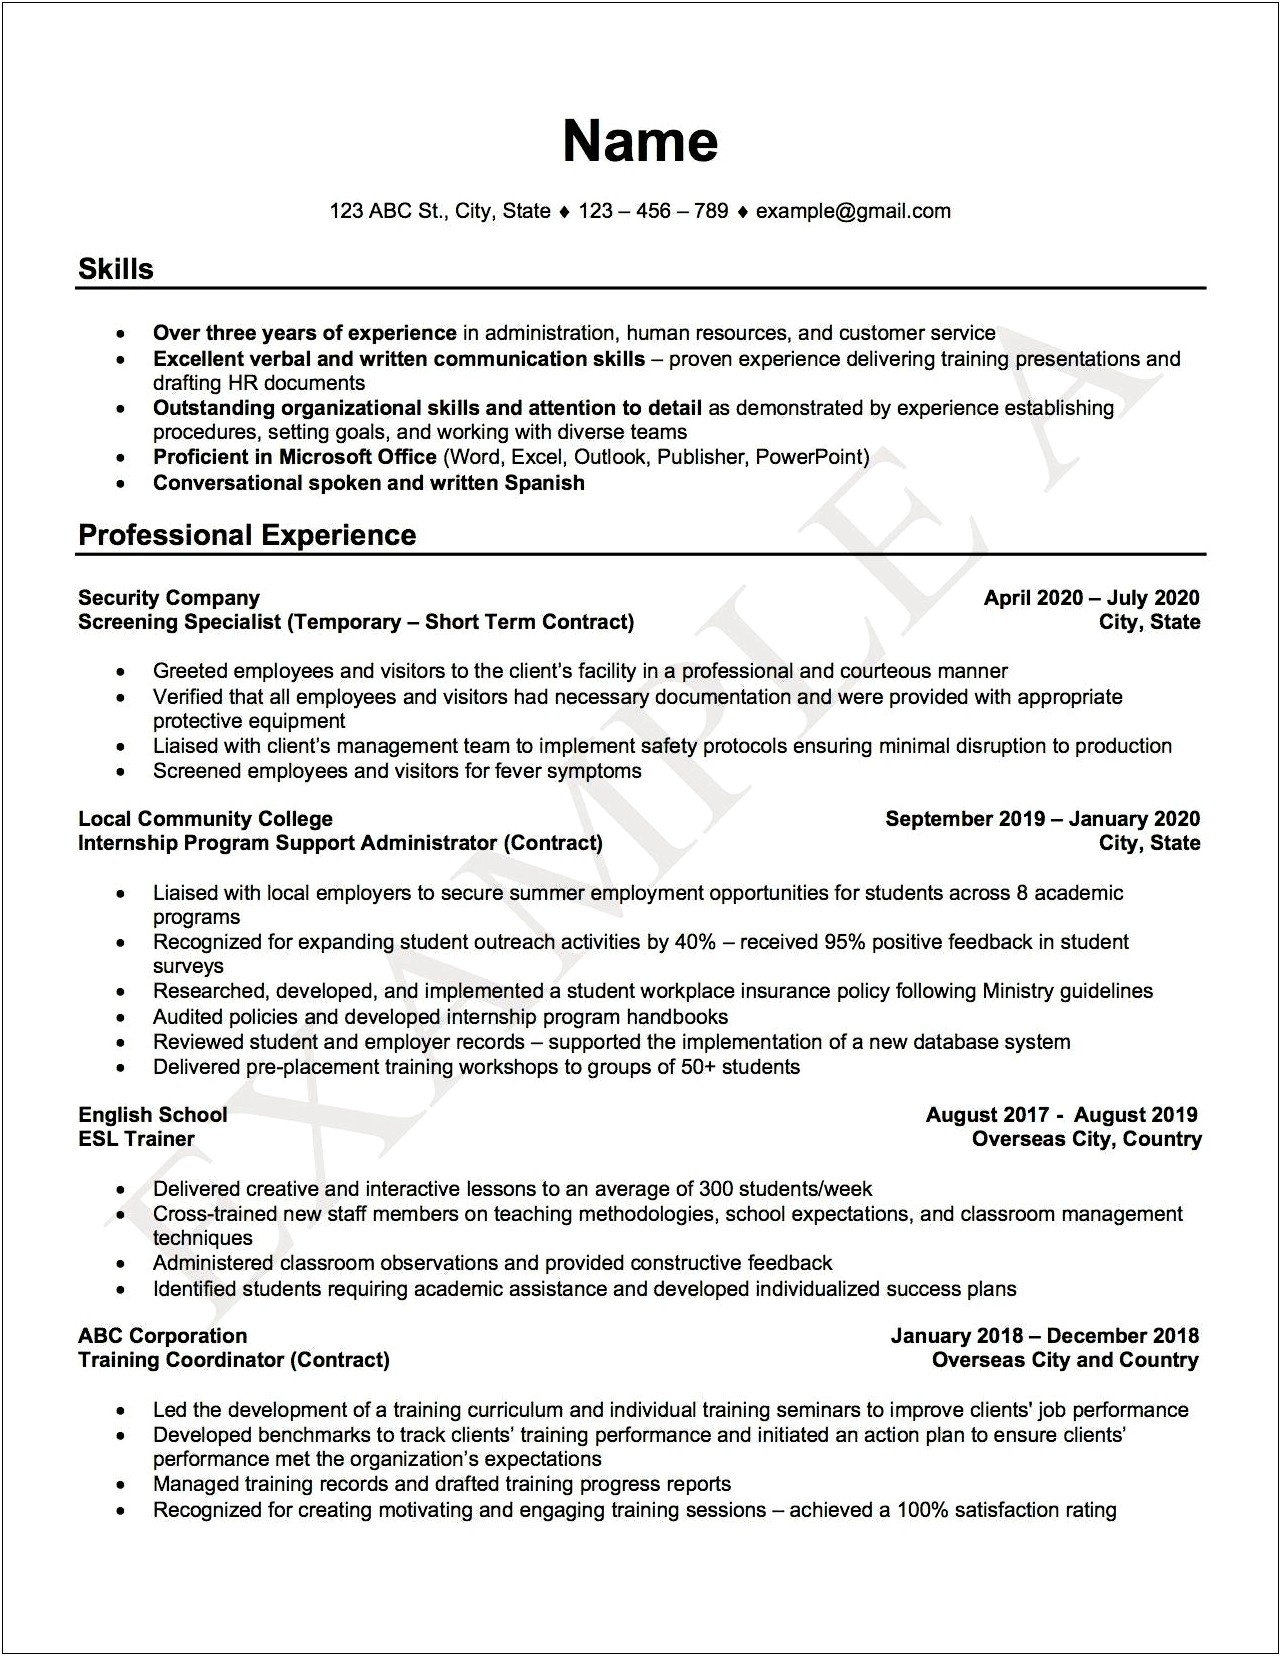 Applying For Job Unrelated To Resume